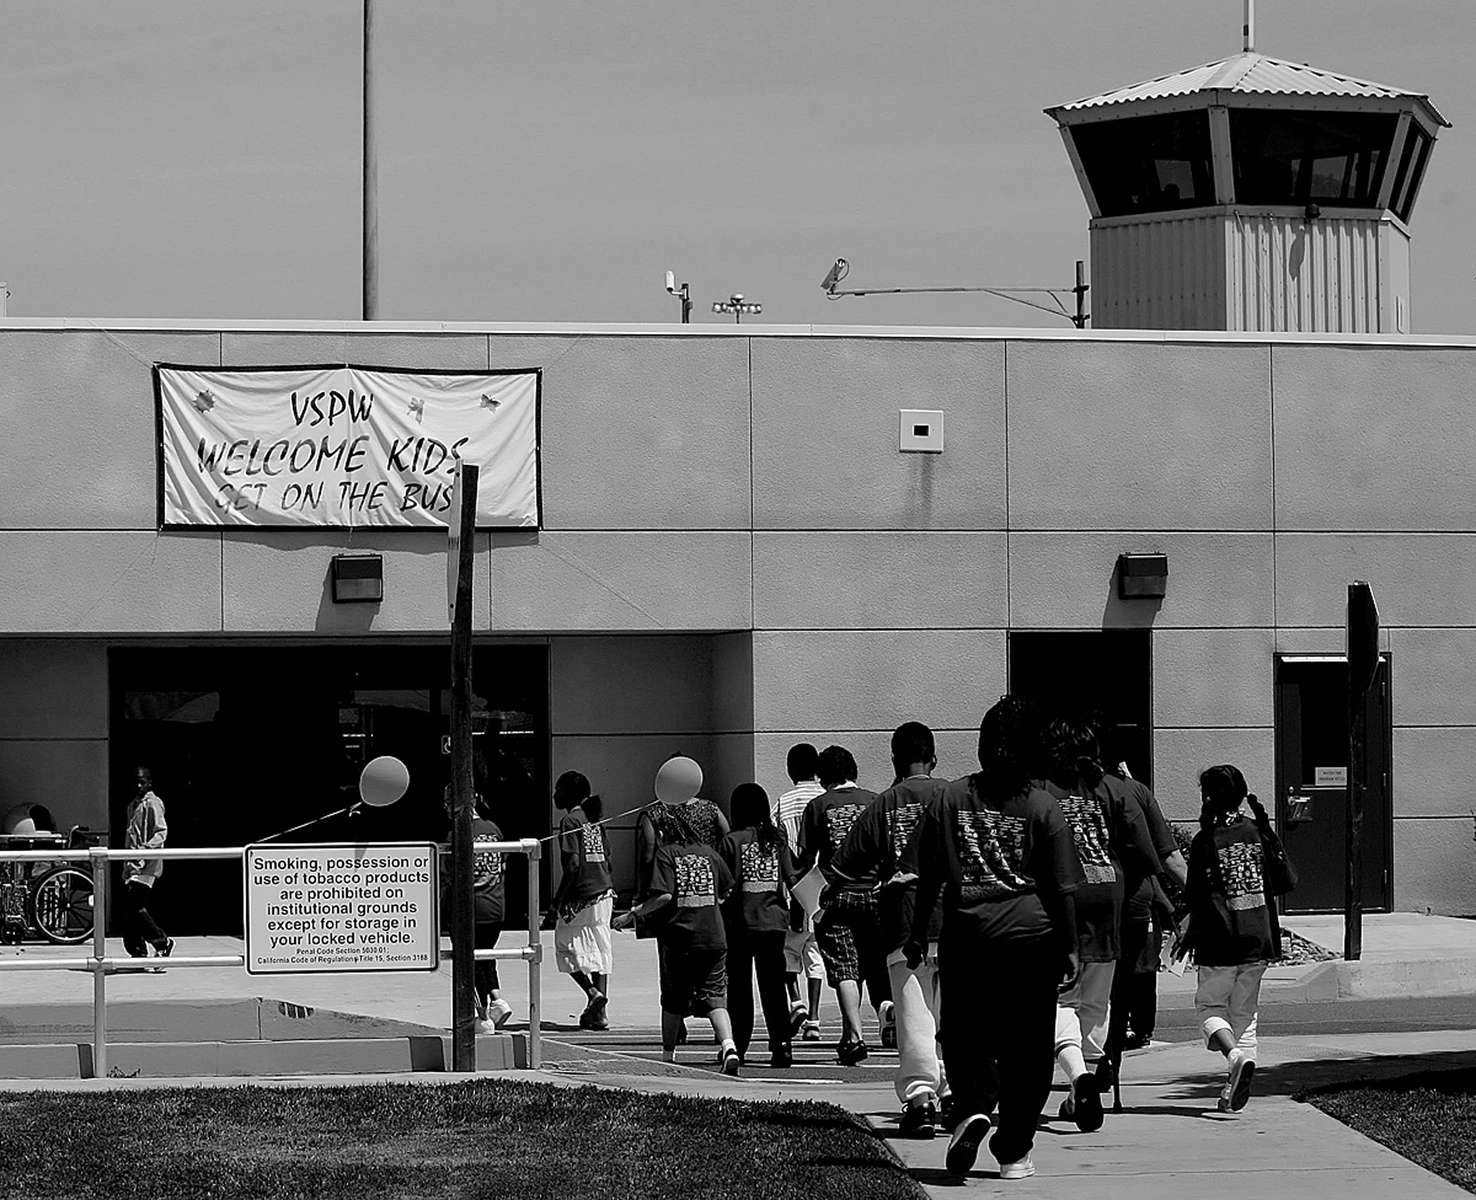 Participants in the Get on the Bus program enter the prison, and go through security processing before seeing inmates. (The Press-Enterprise/ Mark Zaleski)